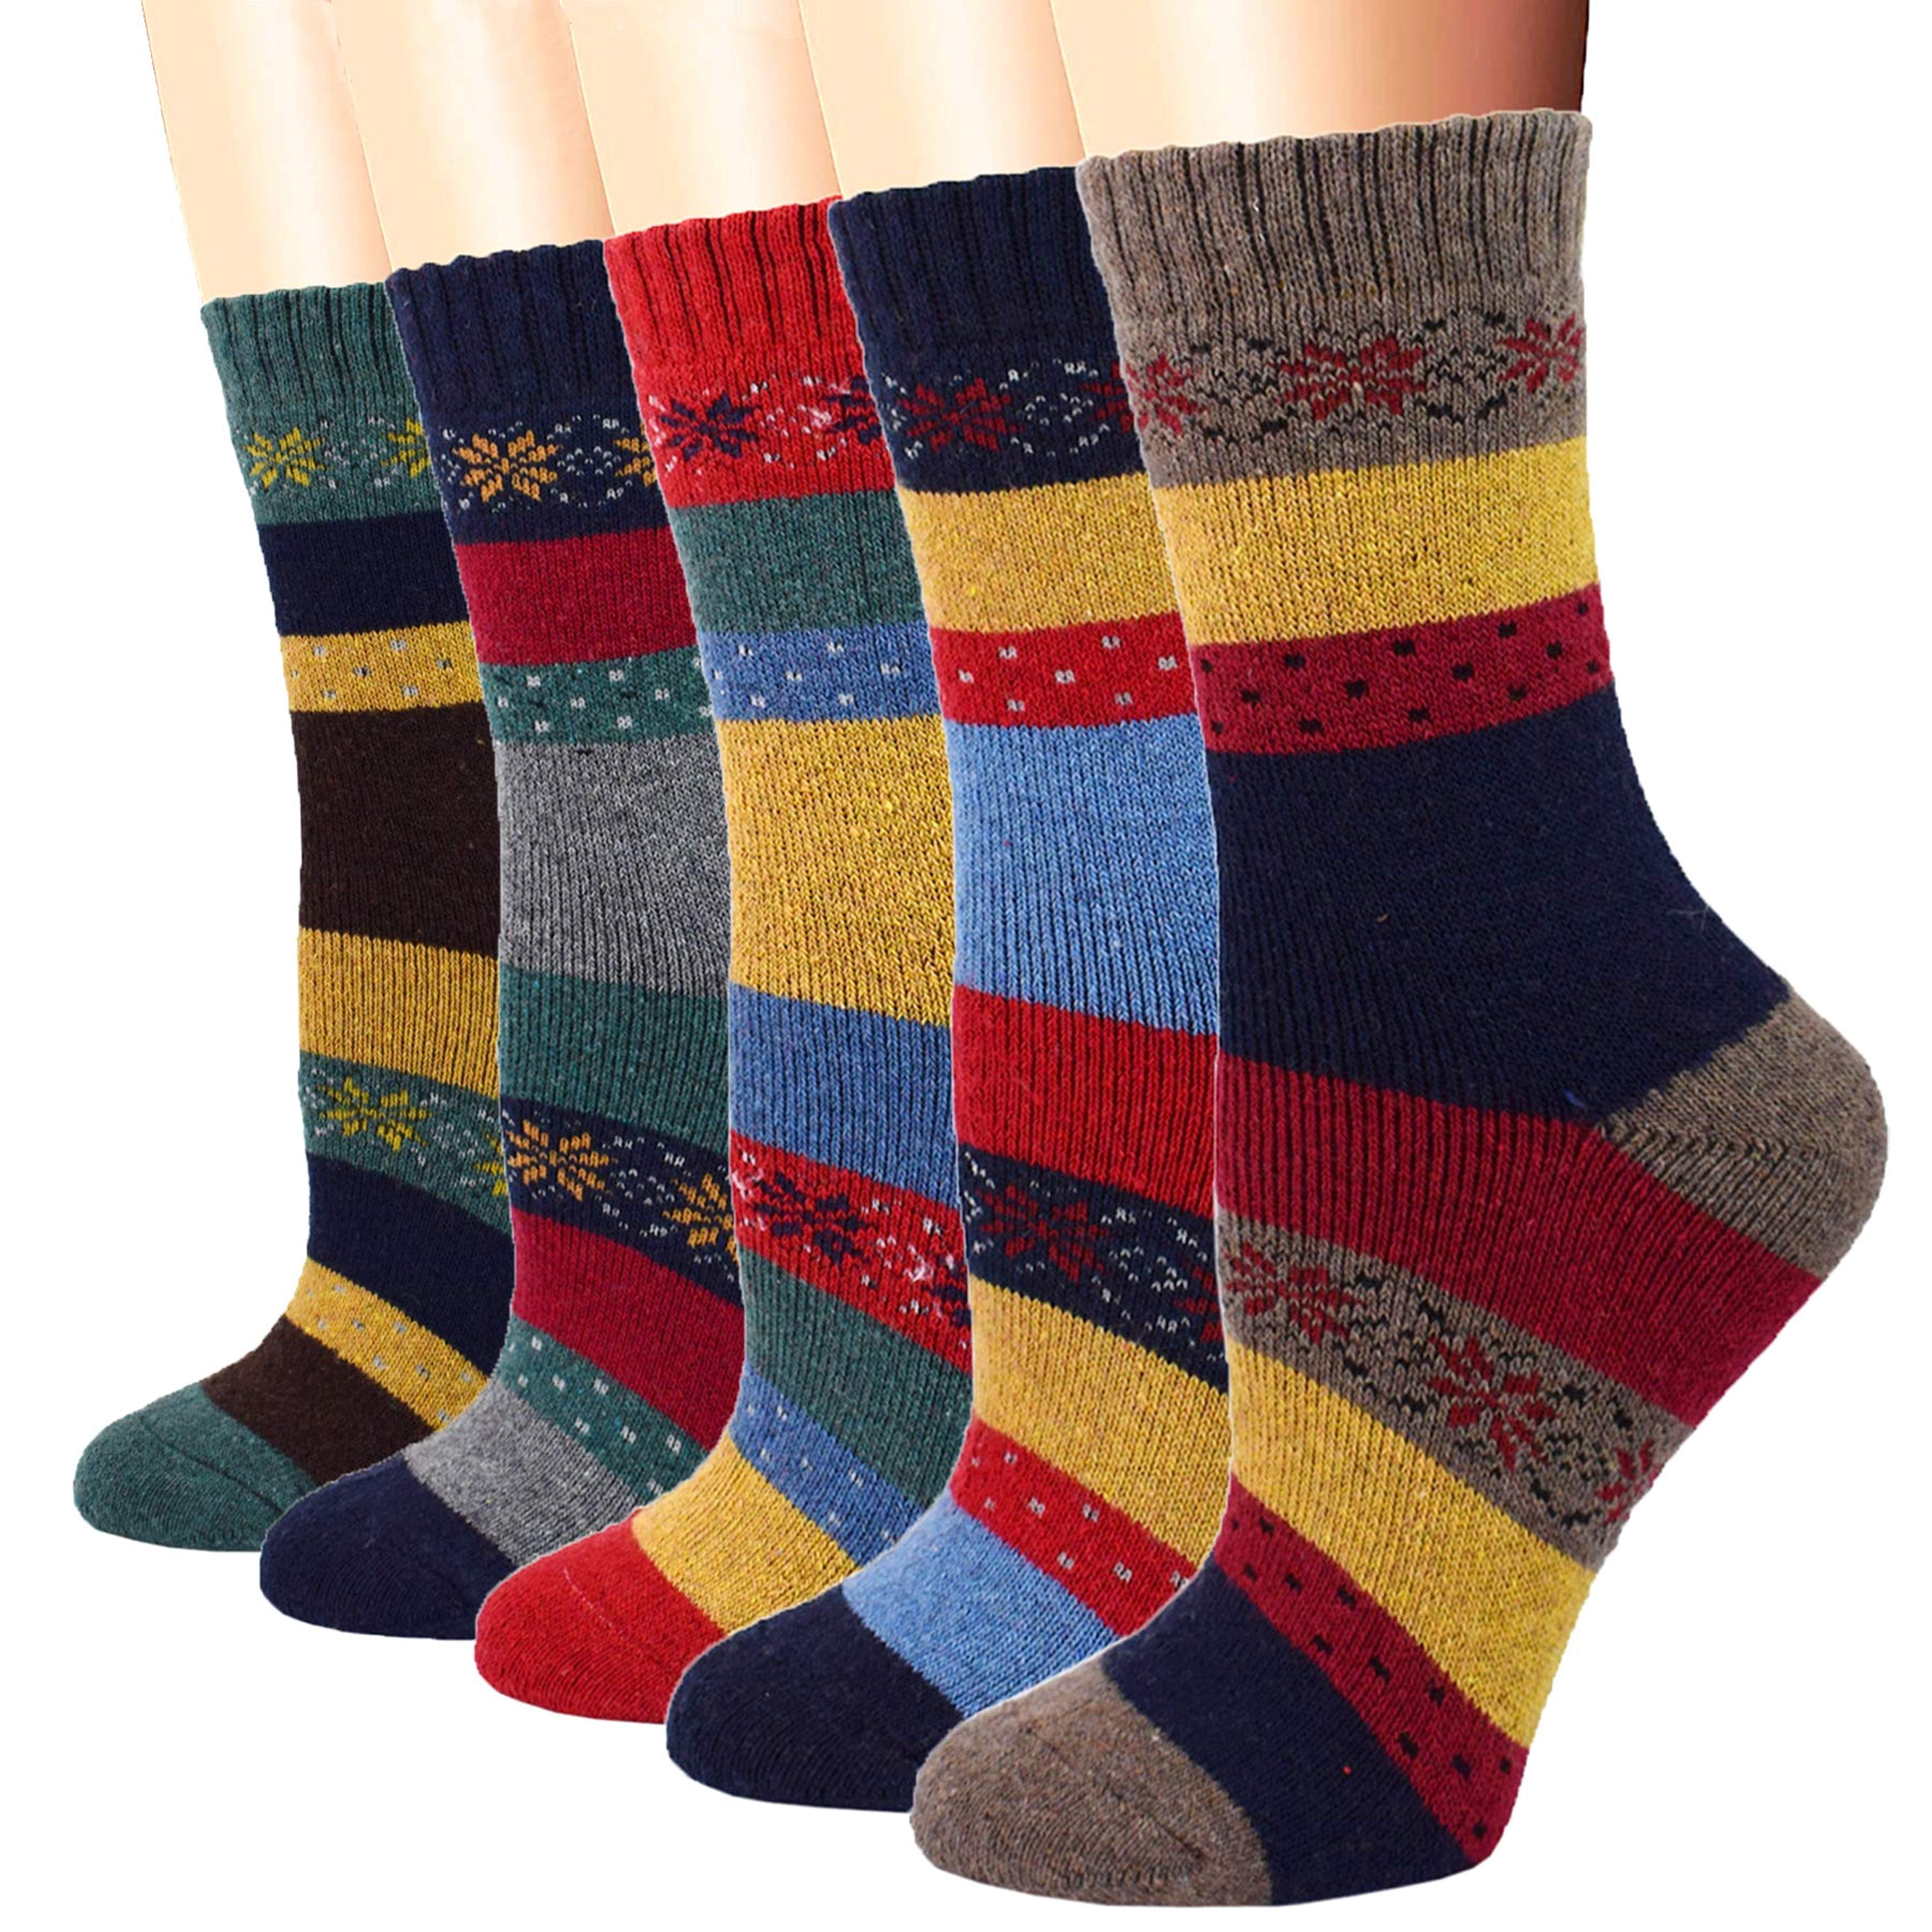 5 Pairs Sock Warm Women Socks Winter Lady Thick Wool Casual Soft Cashmere Fast 